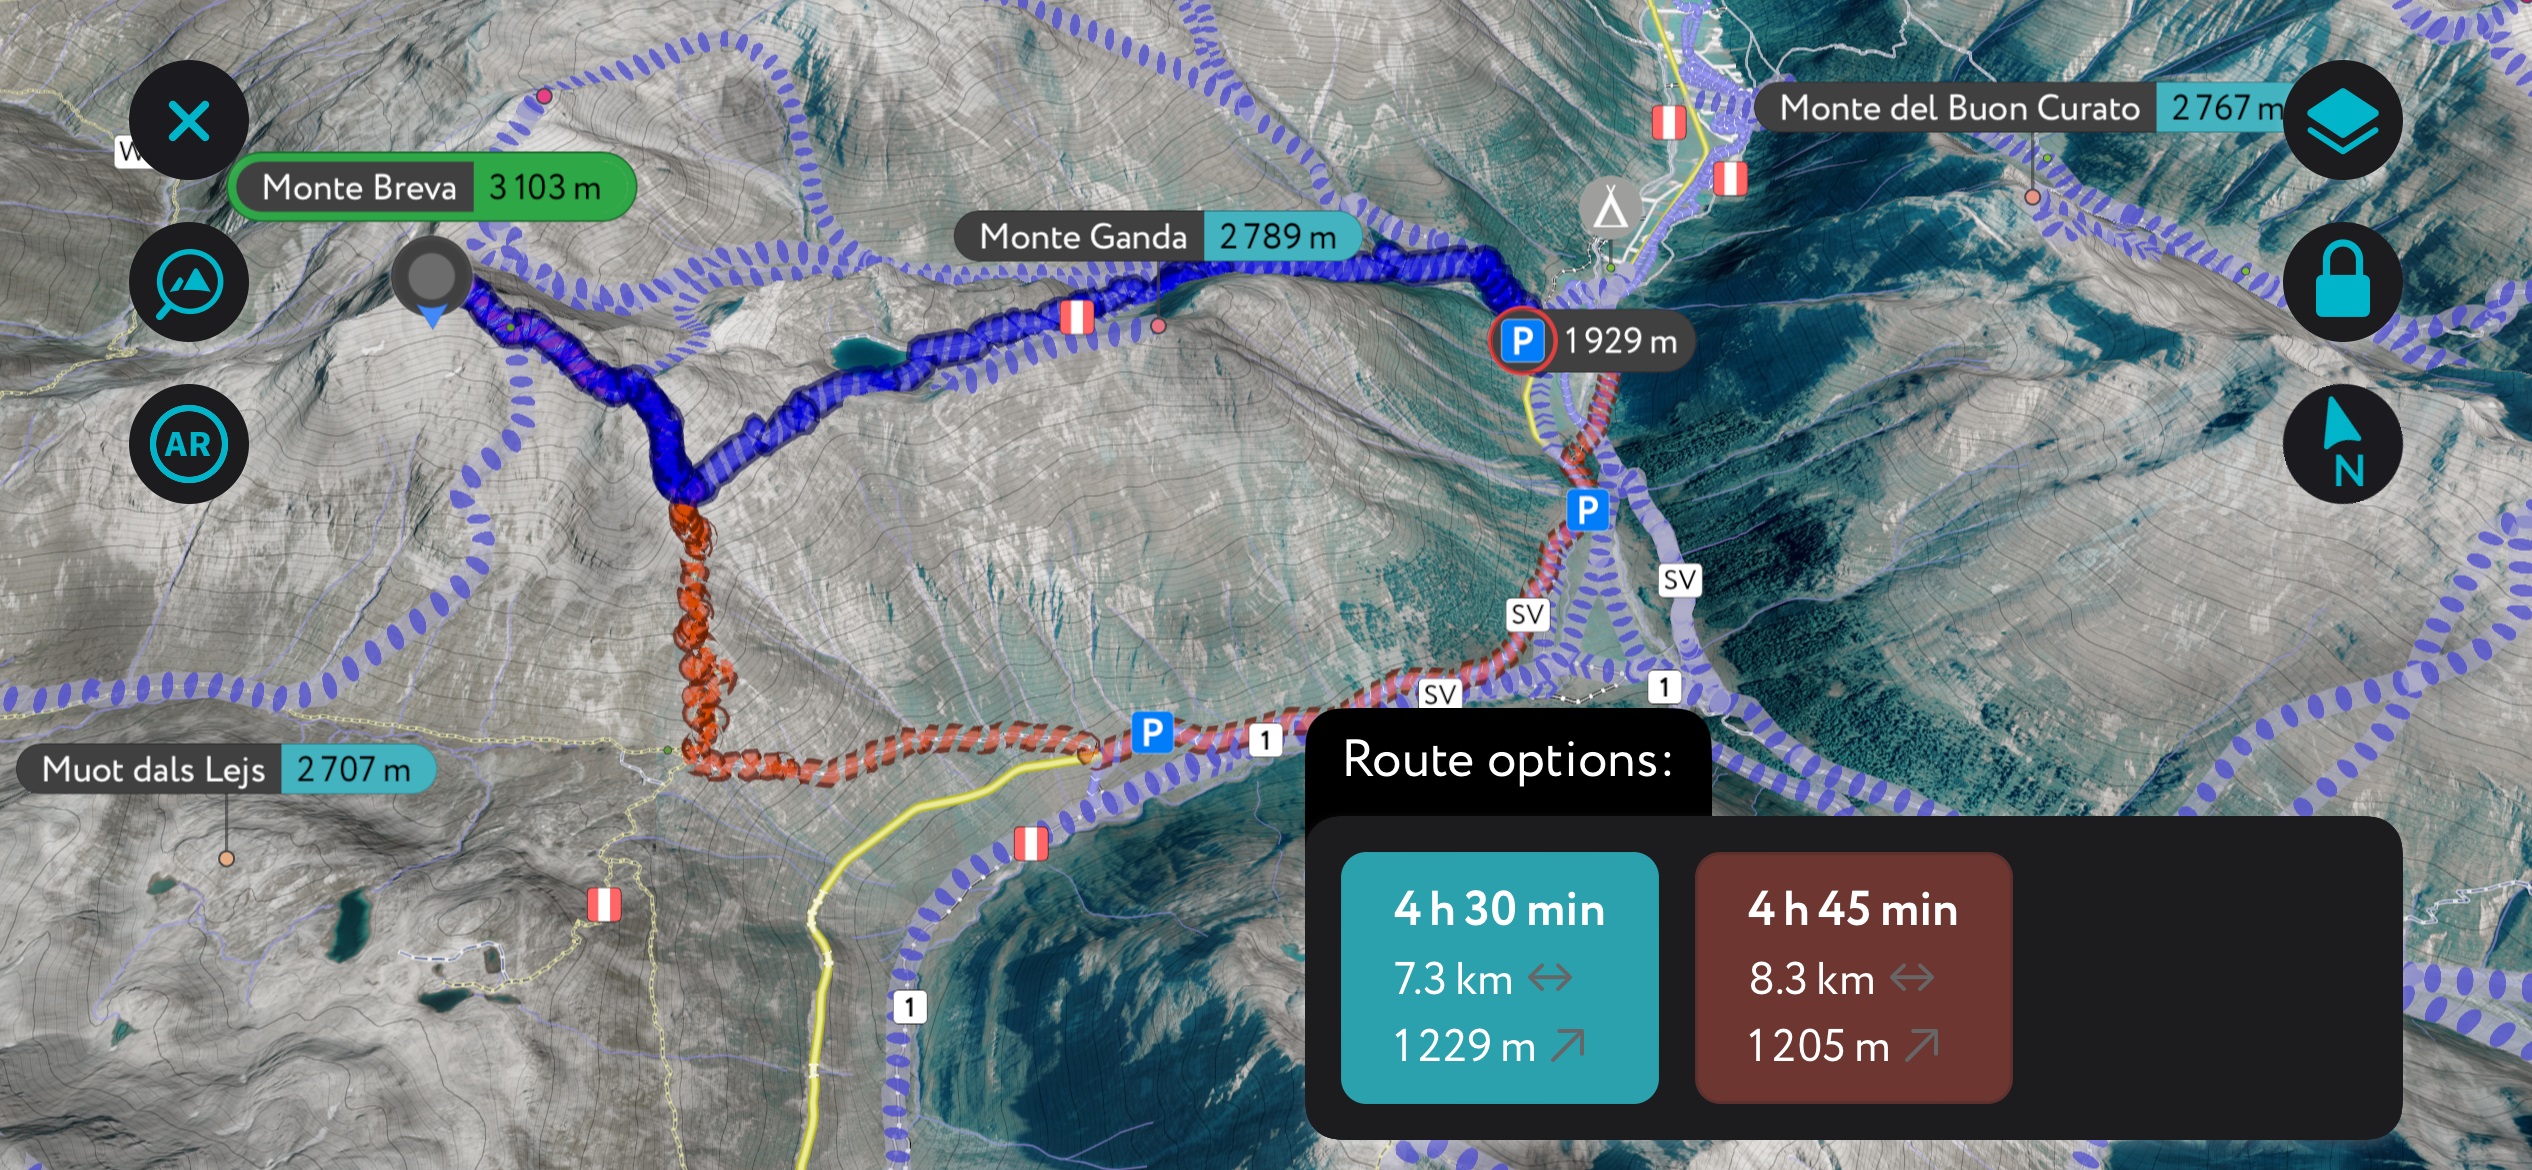 For each mountain, refuge, or other point on the map, PeakVisor generates route options that show you the best way to reach your chosen destination. Hiking Season